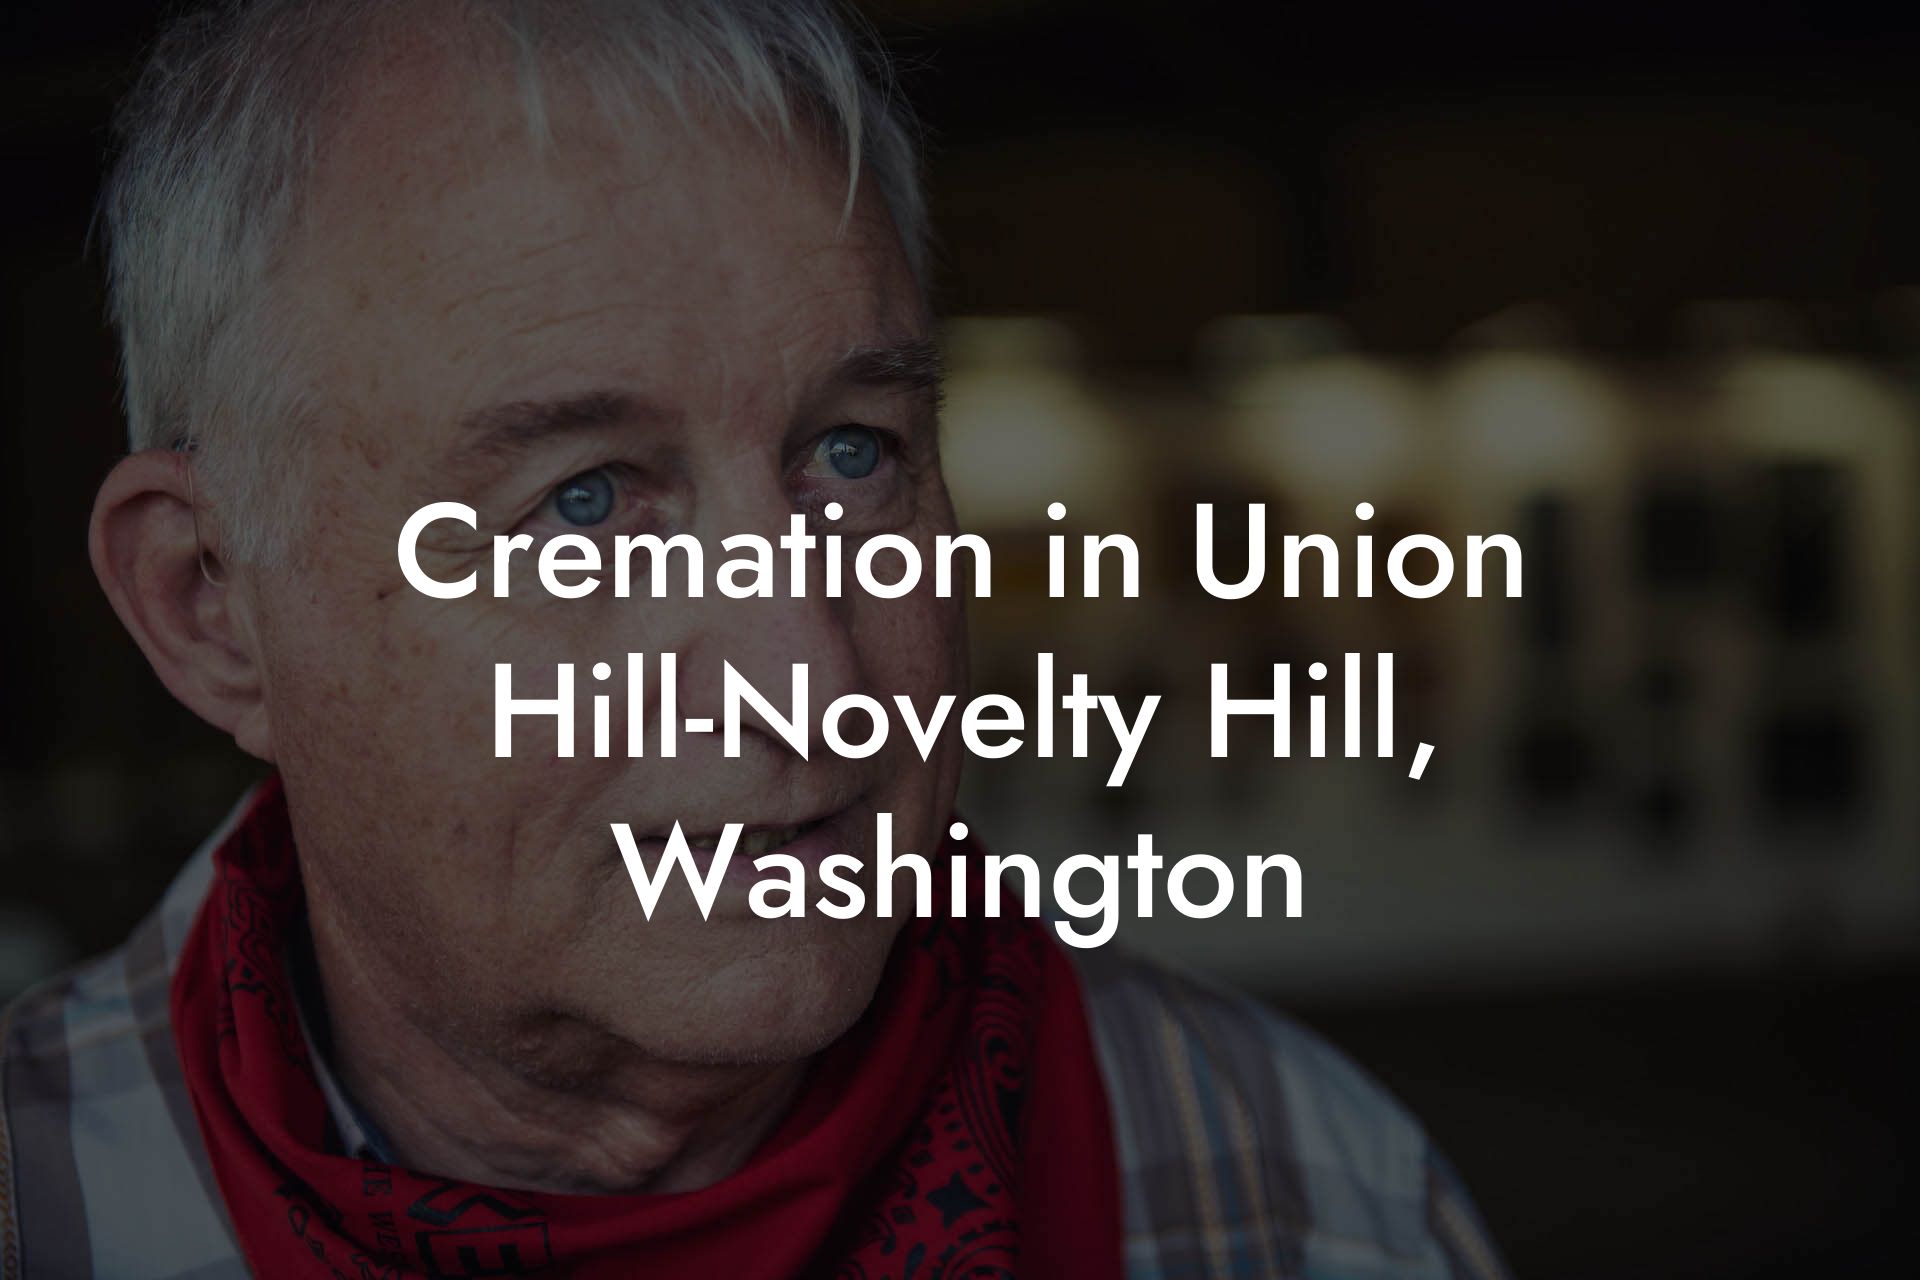 Cremation in Union Hill-Novelty Hill, Washington